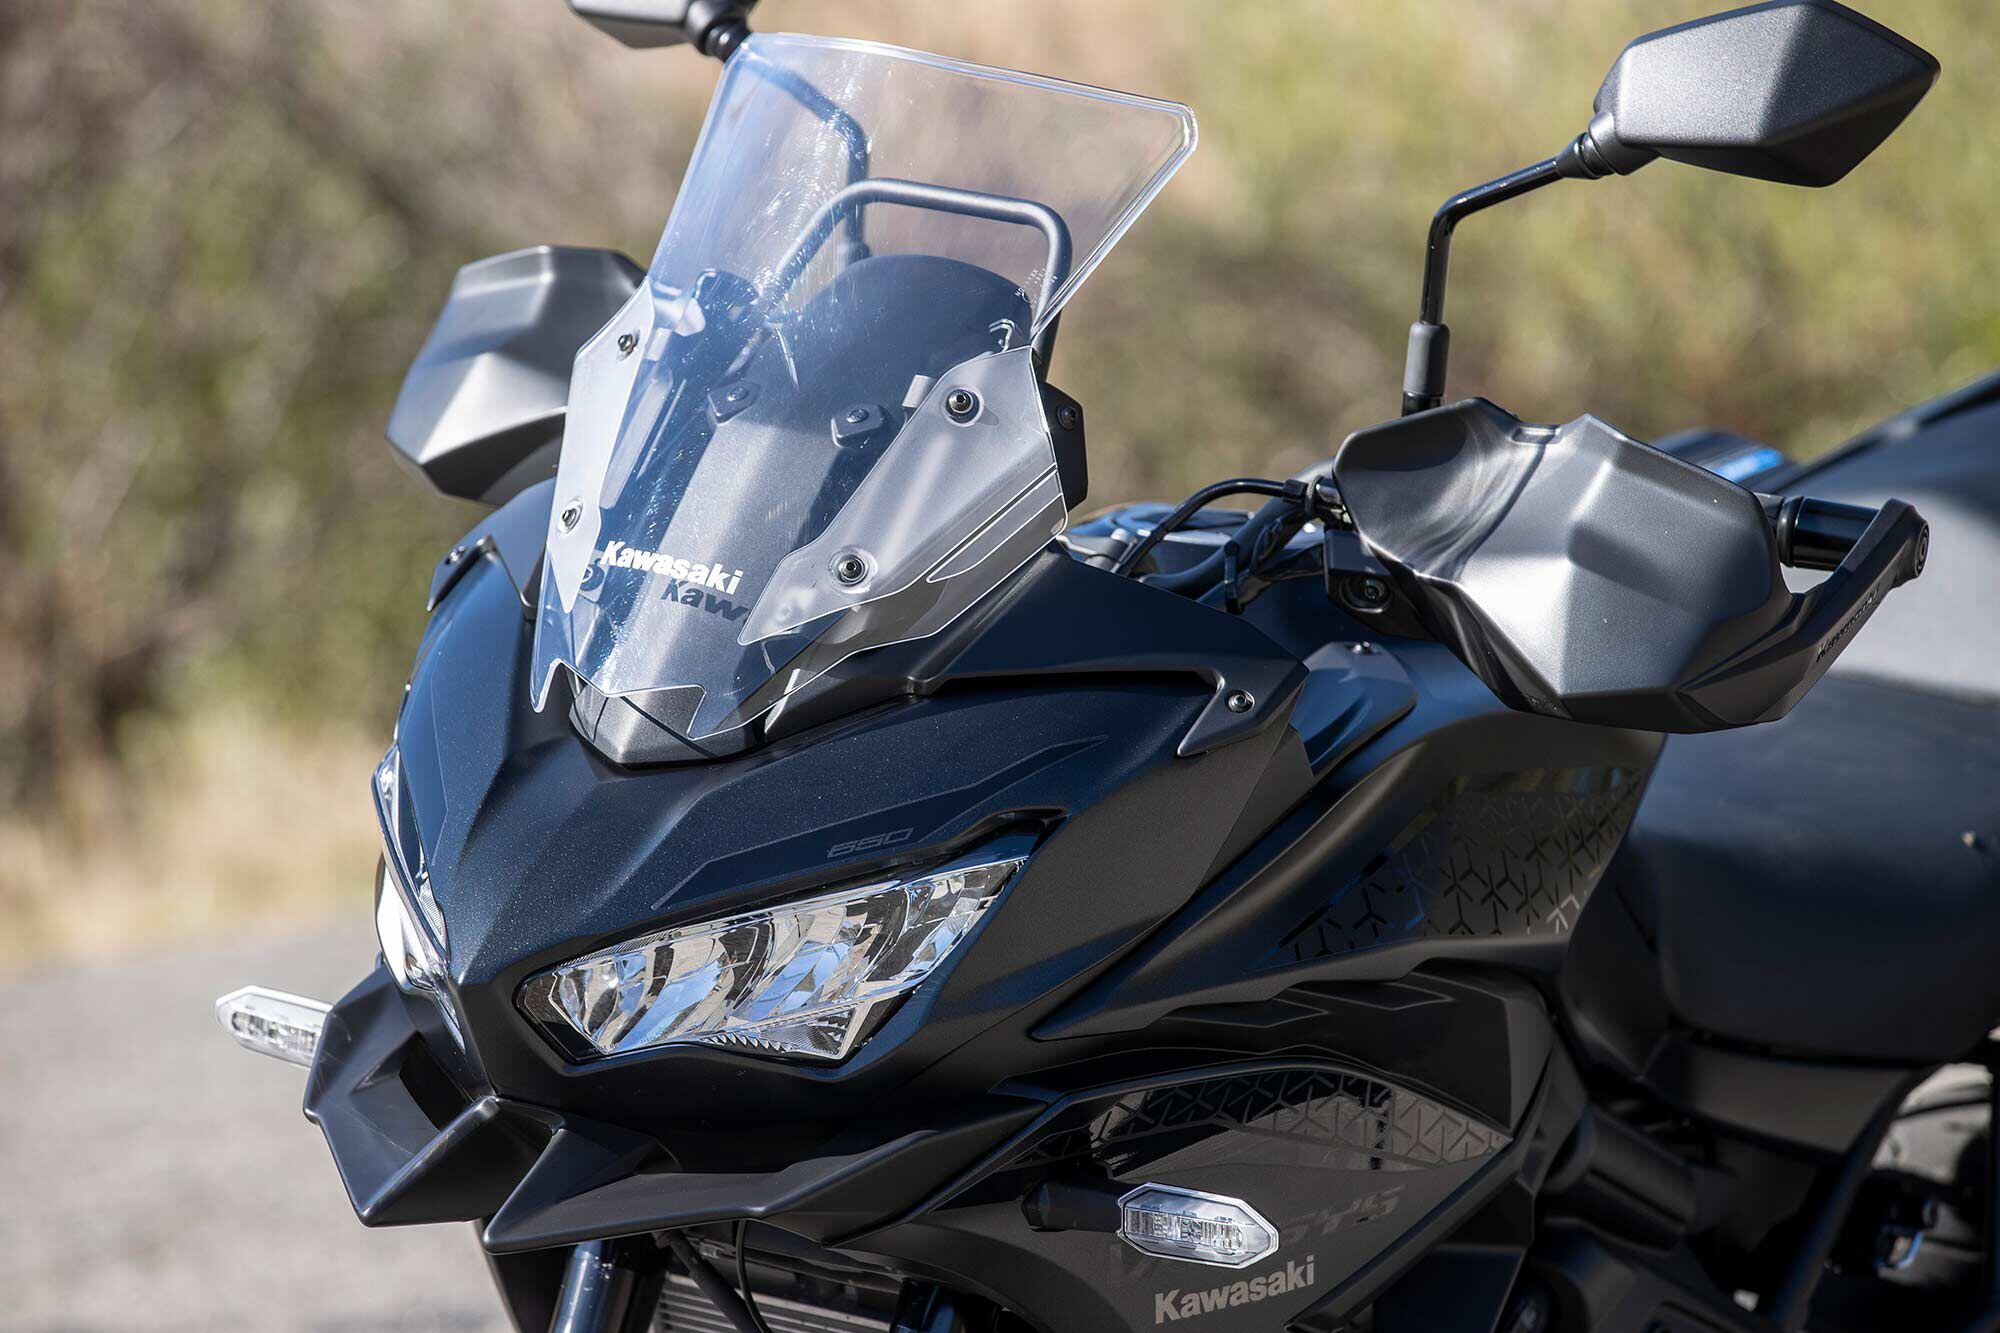 The Versys 650 LT’s stock hand guards offer decent protection. No shortage of lines on the front of this bike. The windscreen can be adjusted to four positions, but requires two hands.